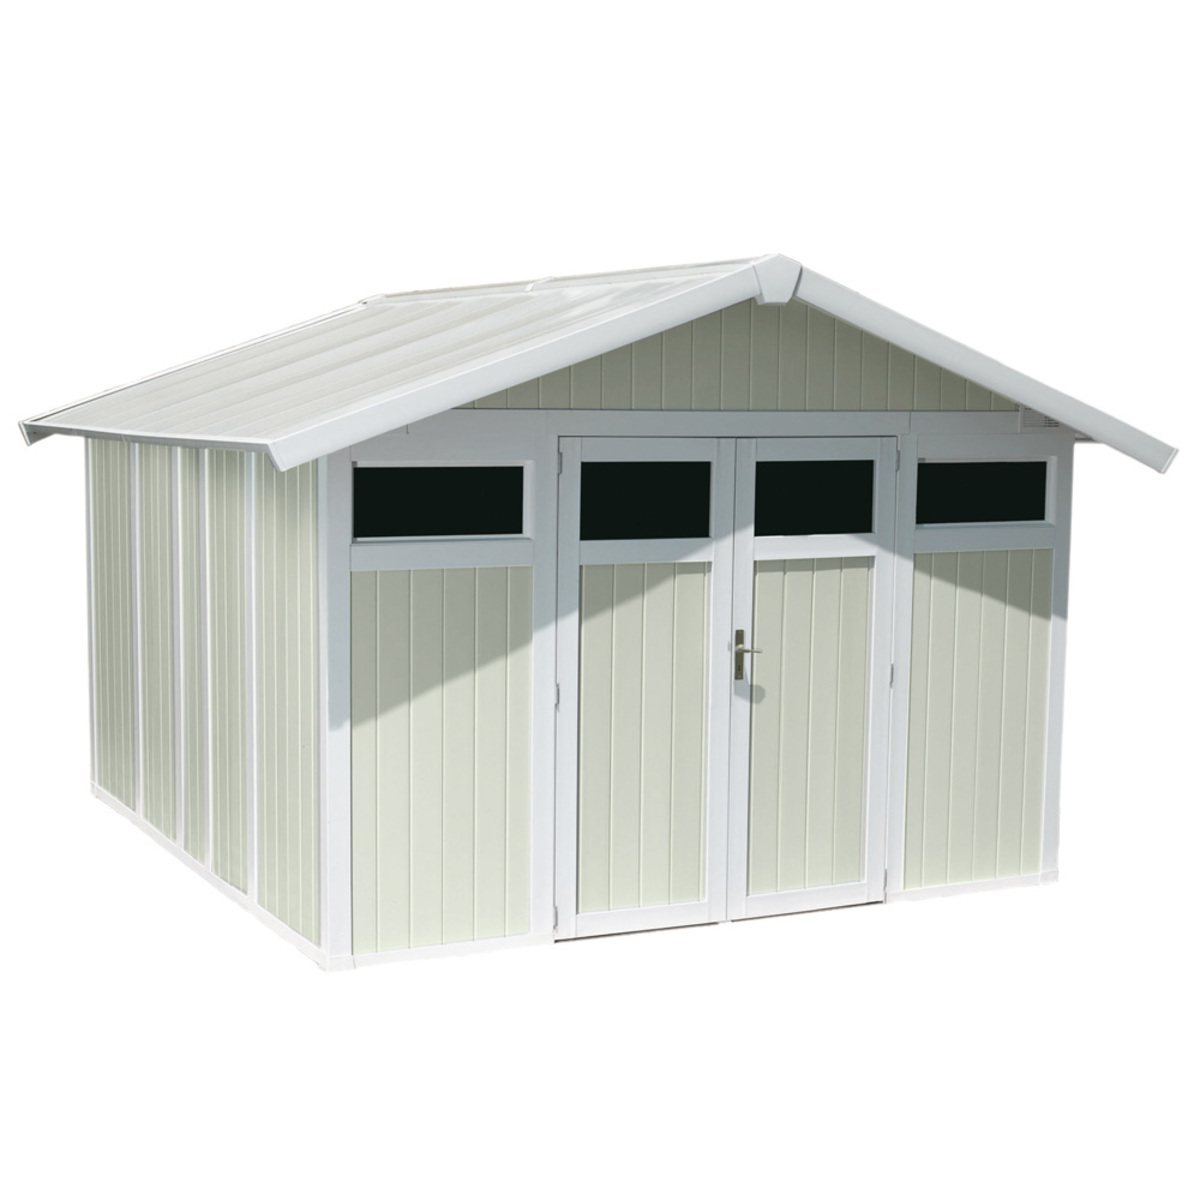 Grosfillex Utility Shed in Green and White - Model Utility 11